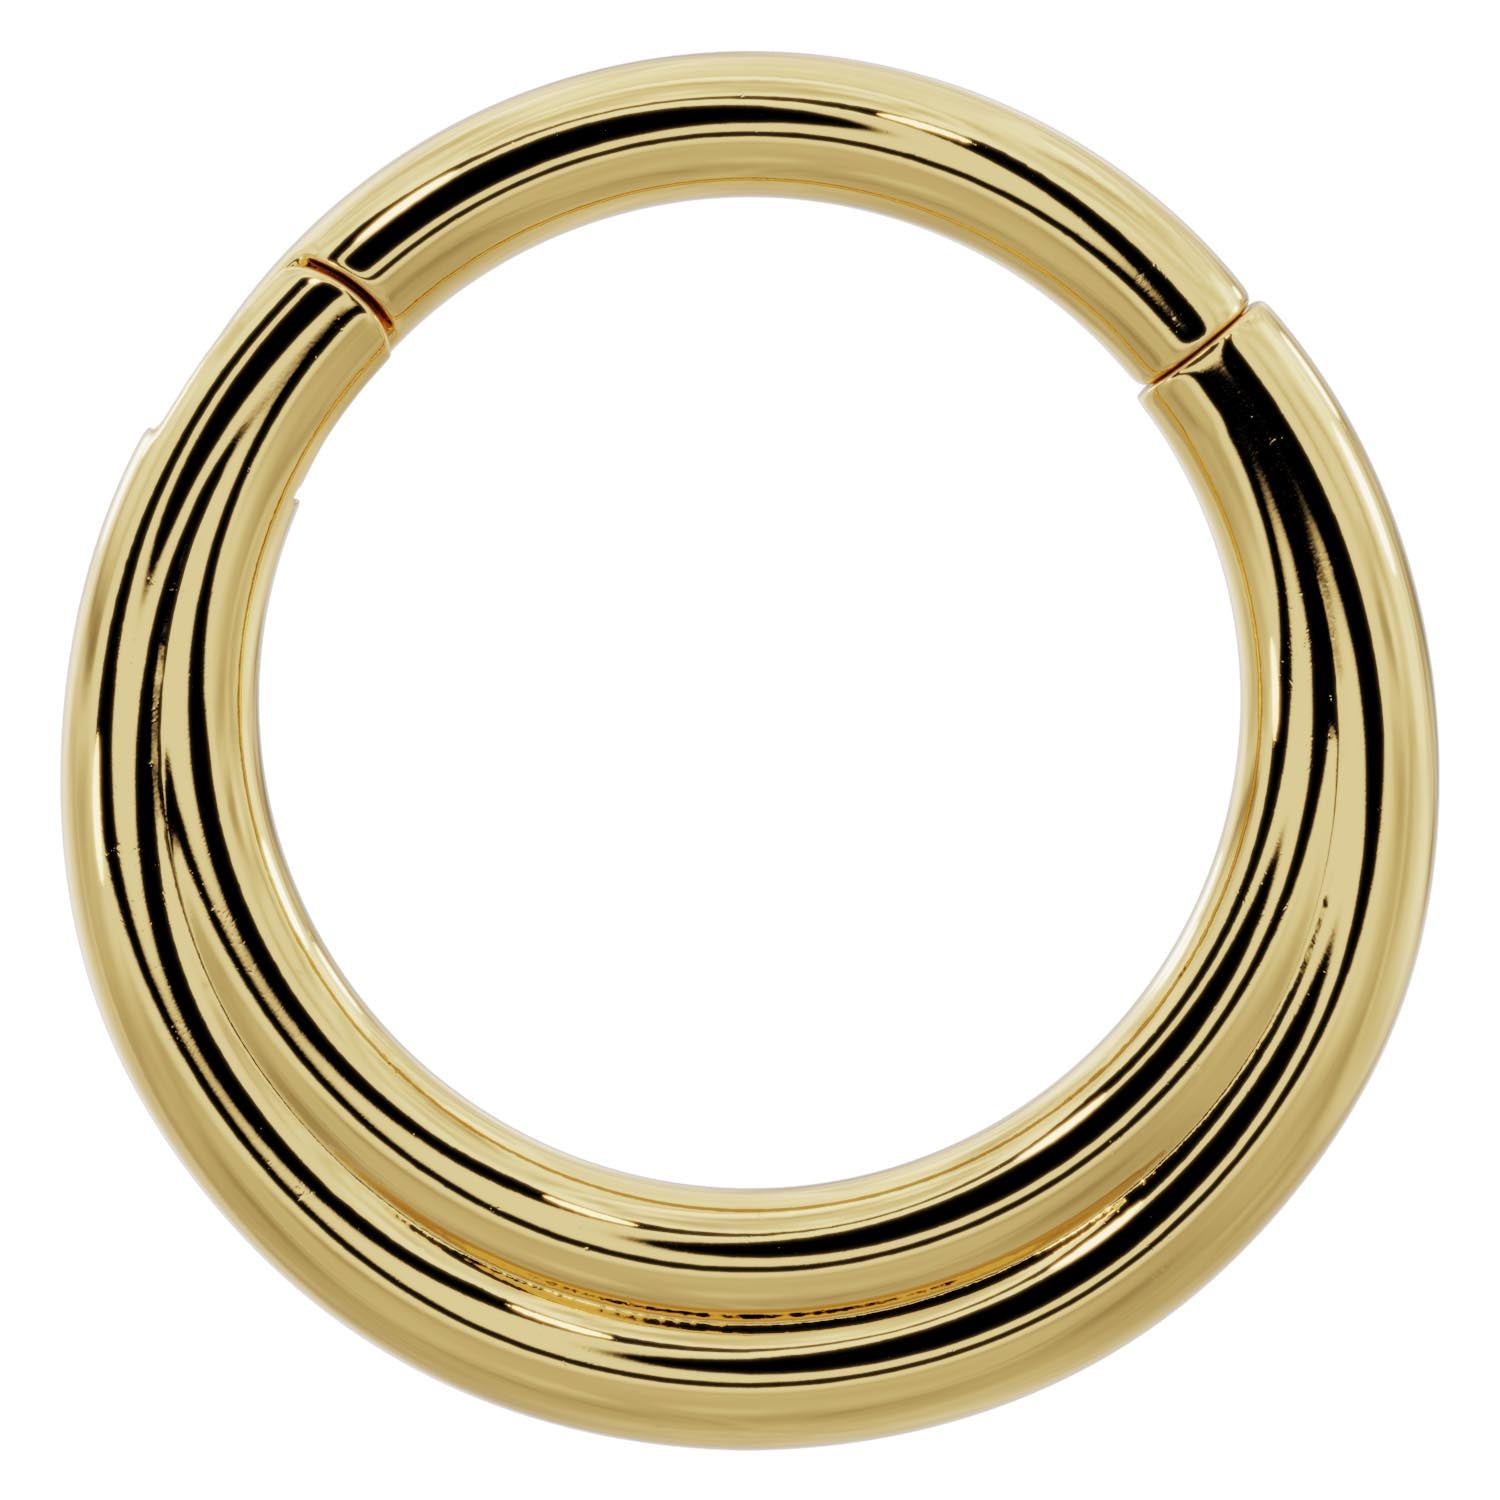 Two Band Eternity 14k Gold Clicker Ring Hoop-14K Yellow Gold   16G (1.2mm)   3 8